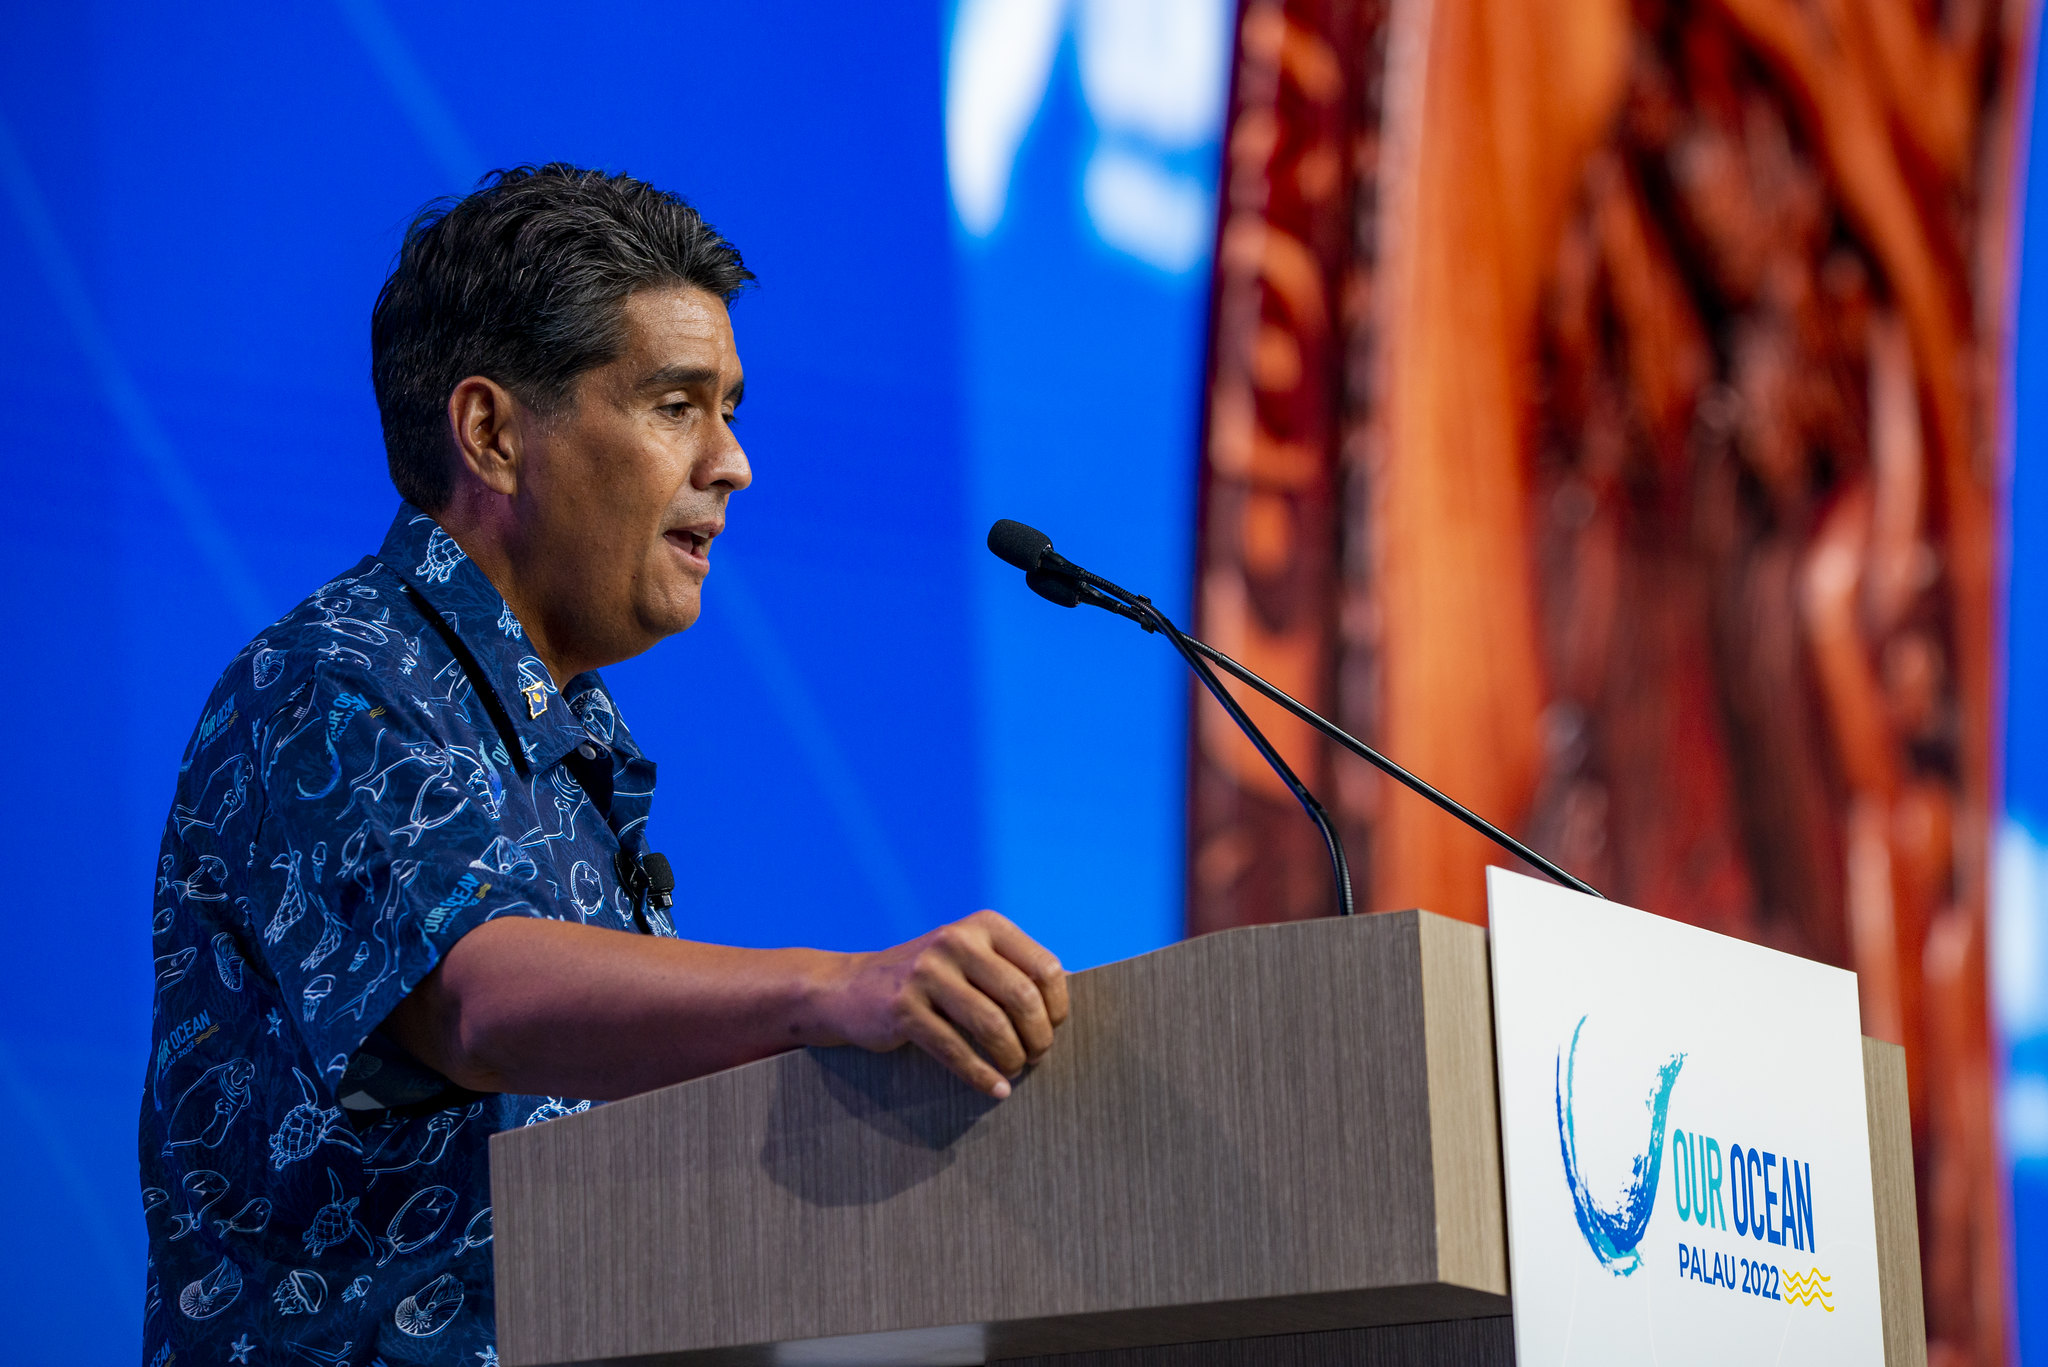 Palau's president Surangel Whipps Jr. at the Our Ocean conference in Koror, Palau on April 14, 2022. (Jesse Alpert—U.S. Department of State/Republic of Palau)